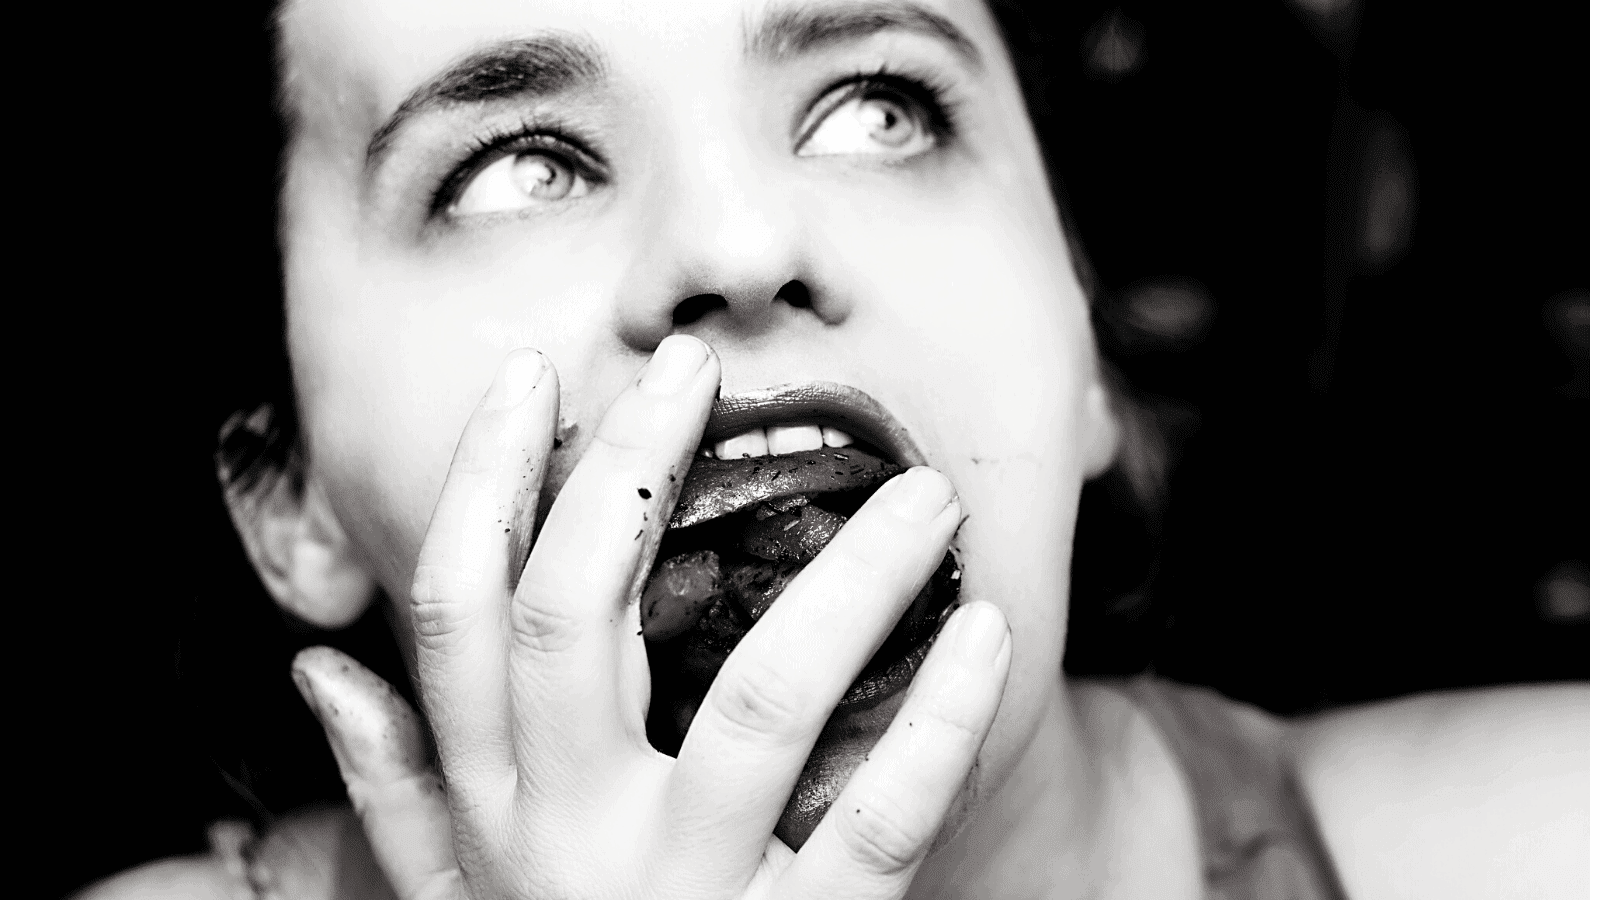 14 Triggers That Could Cause Someone to Binge Eat